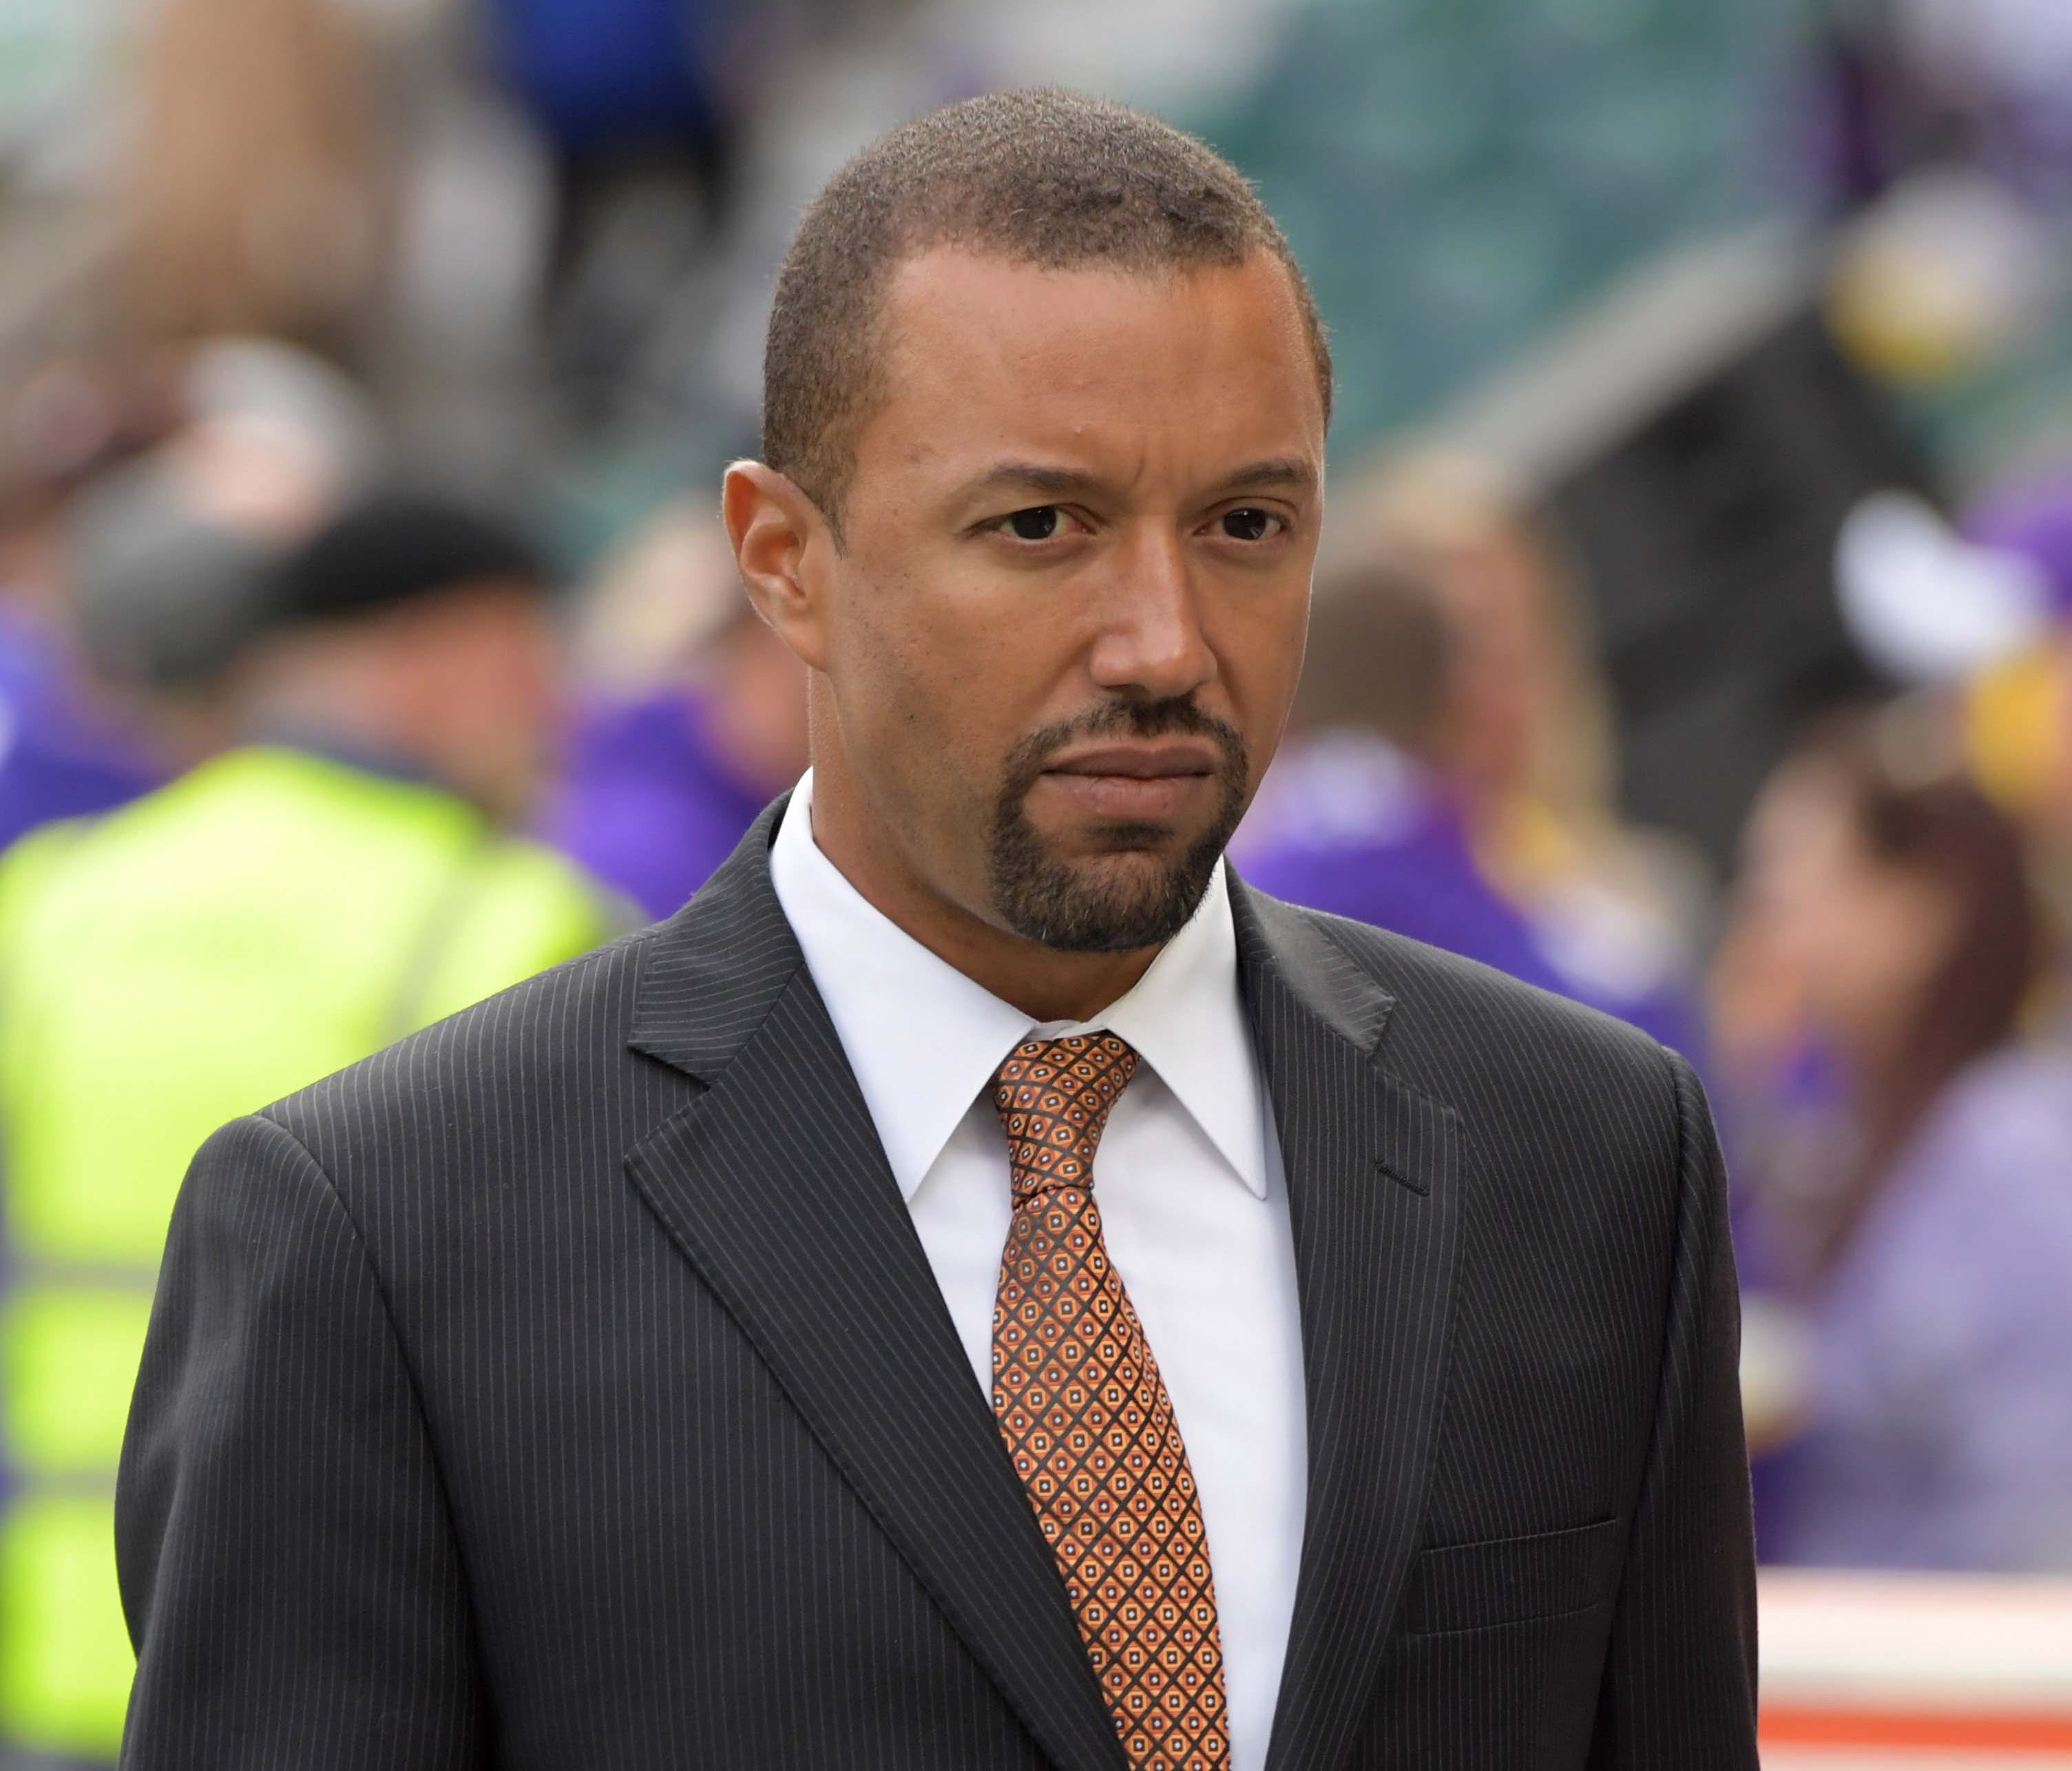 Cleveland Browns executive vice president and general manager Sashi Brown reacts during an NFL International Series game against the Minnesota Vikings at Twickenham Stadium.